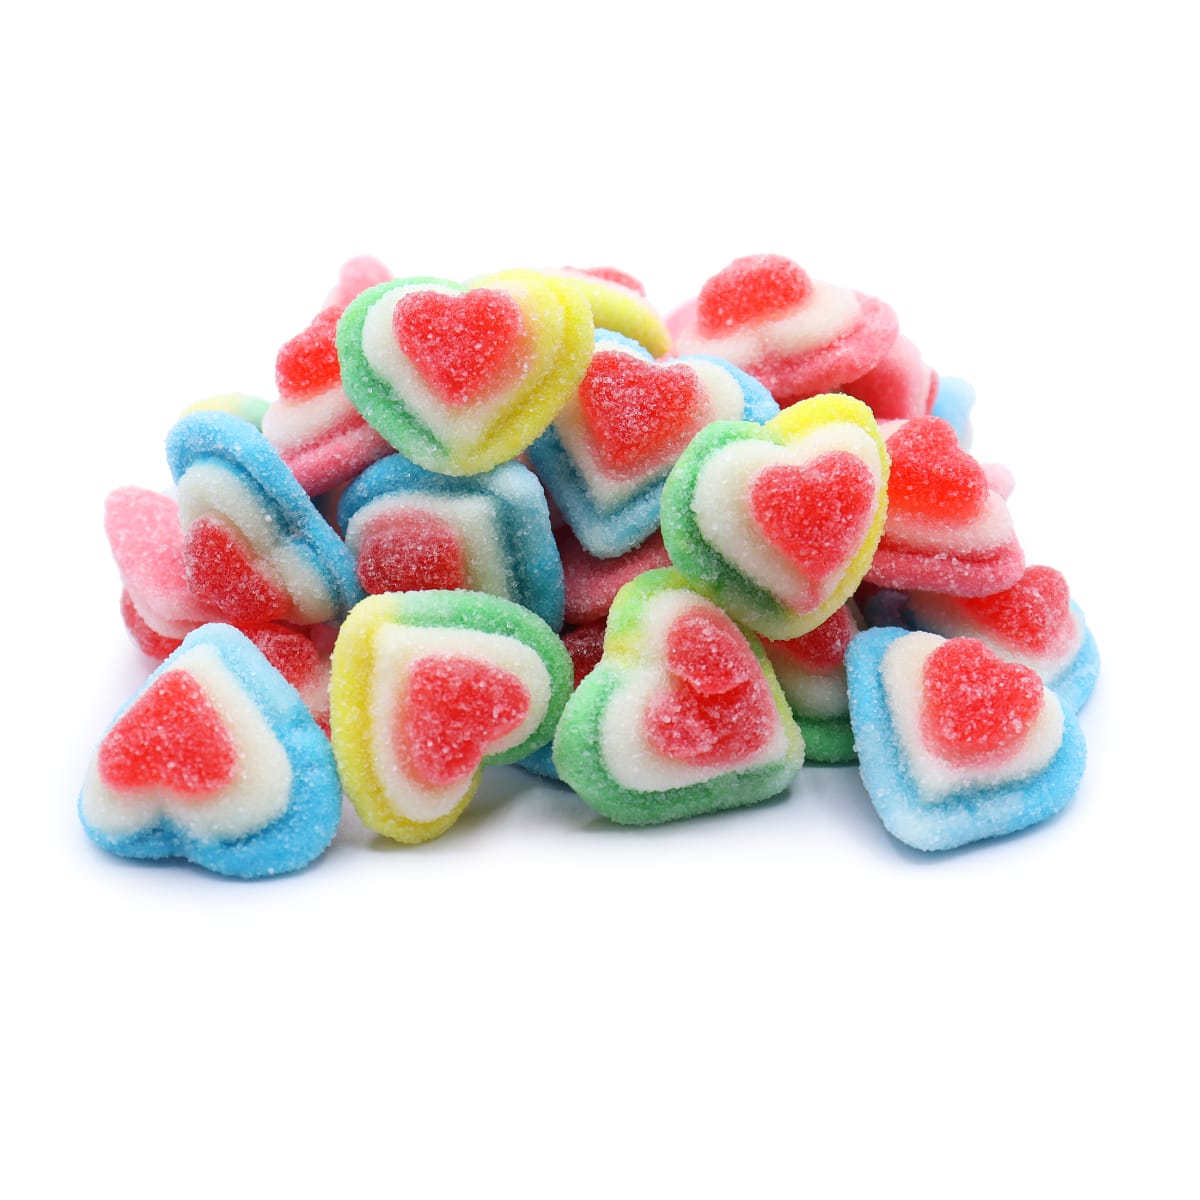 Watermelon Red Sugared Heart Fake Candy / Set of 5 Mini Candy 